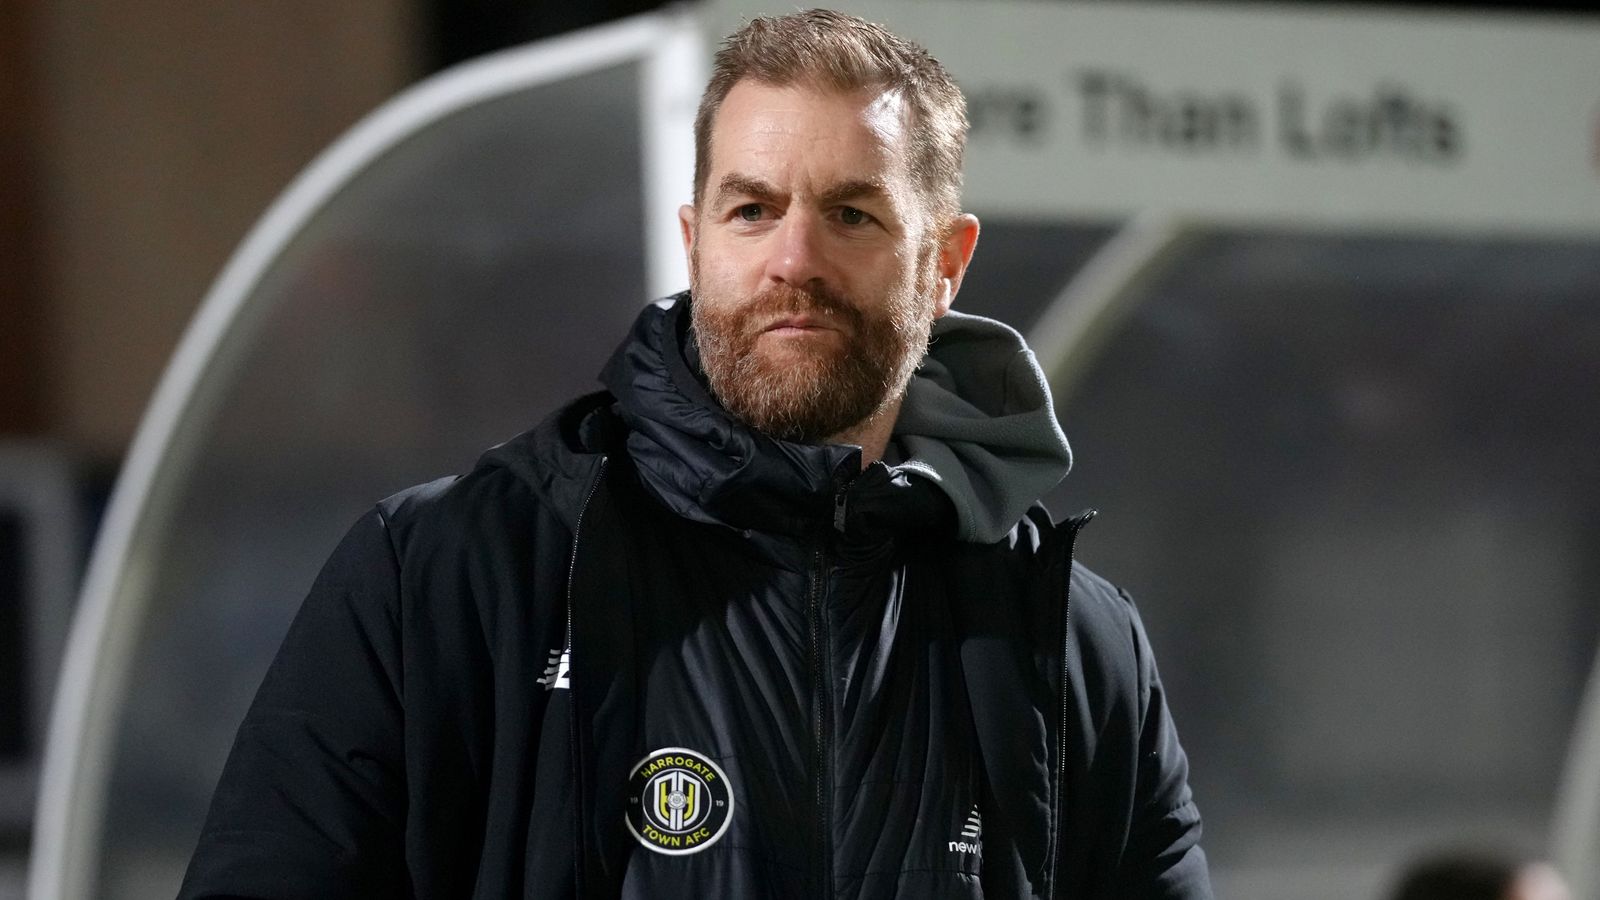 Simon Weaver interview: Harrogate Town chief’s journey to becoming the EFL’s longest-serving manager